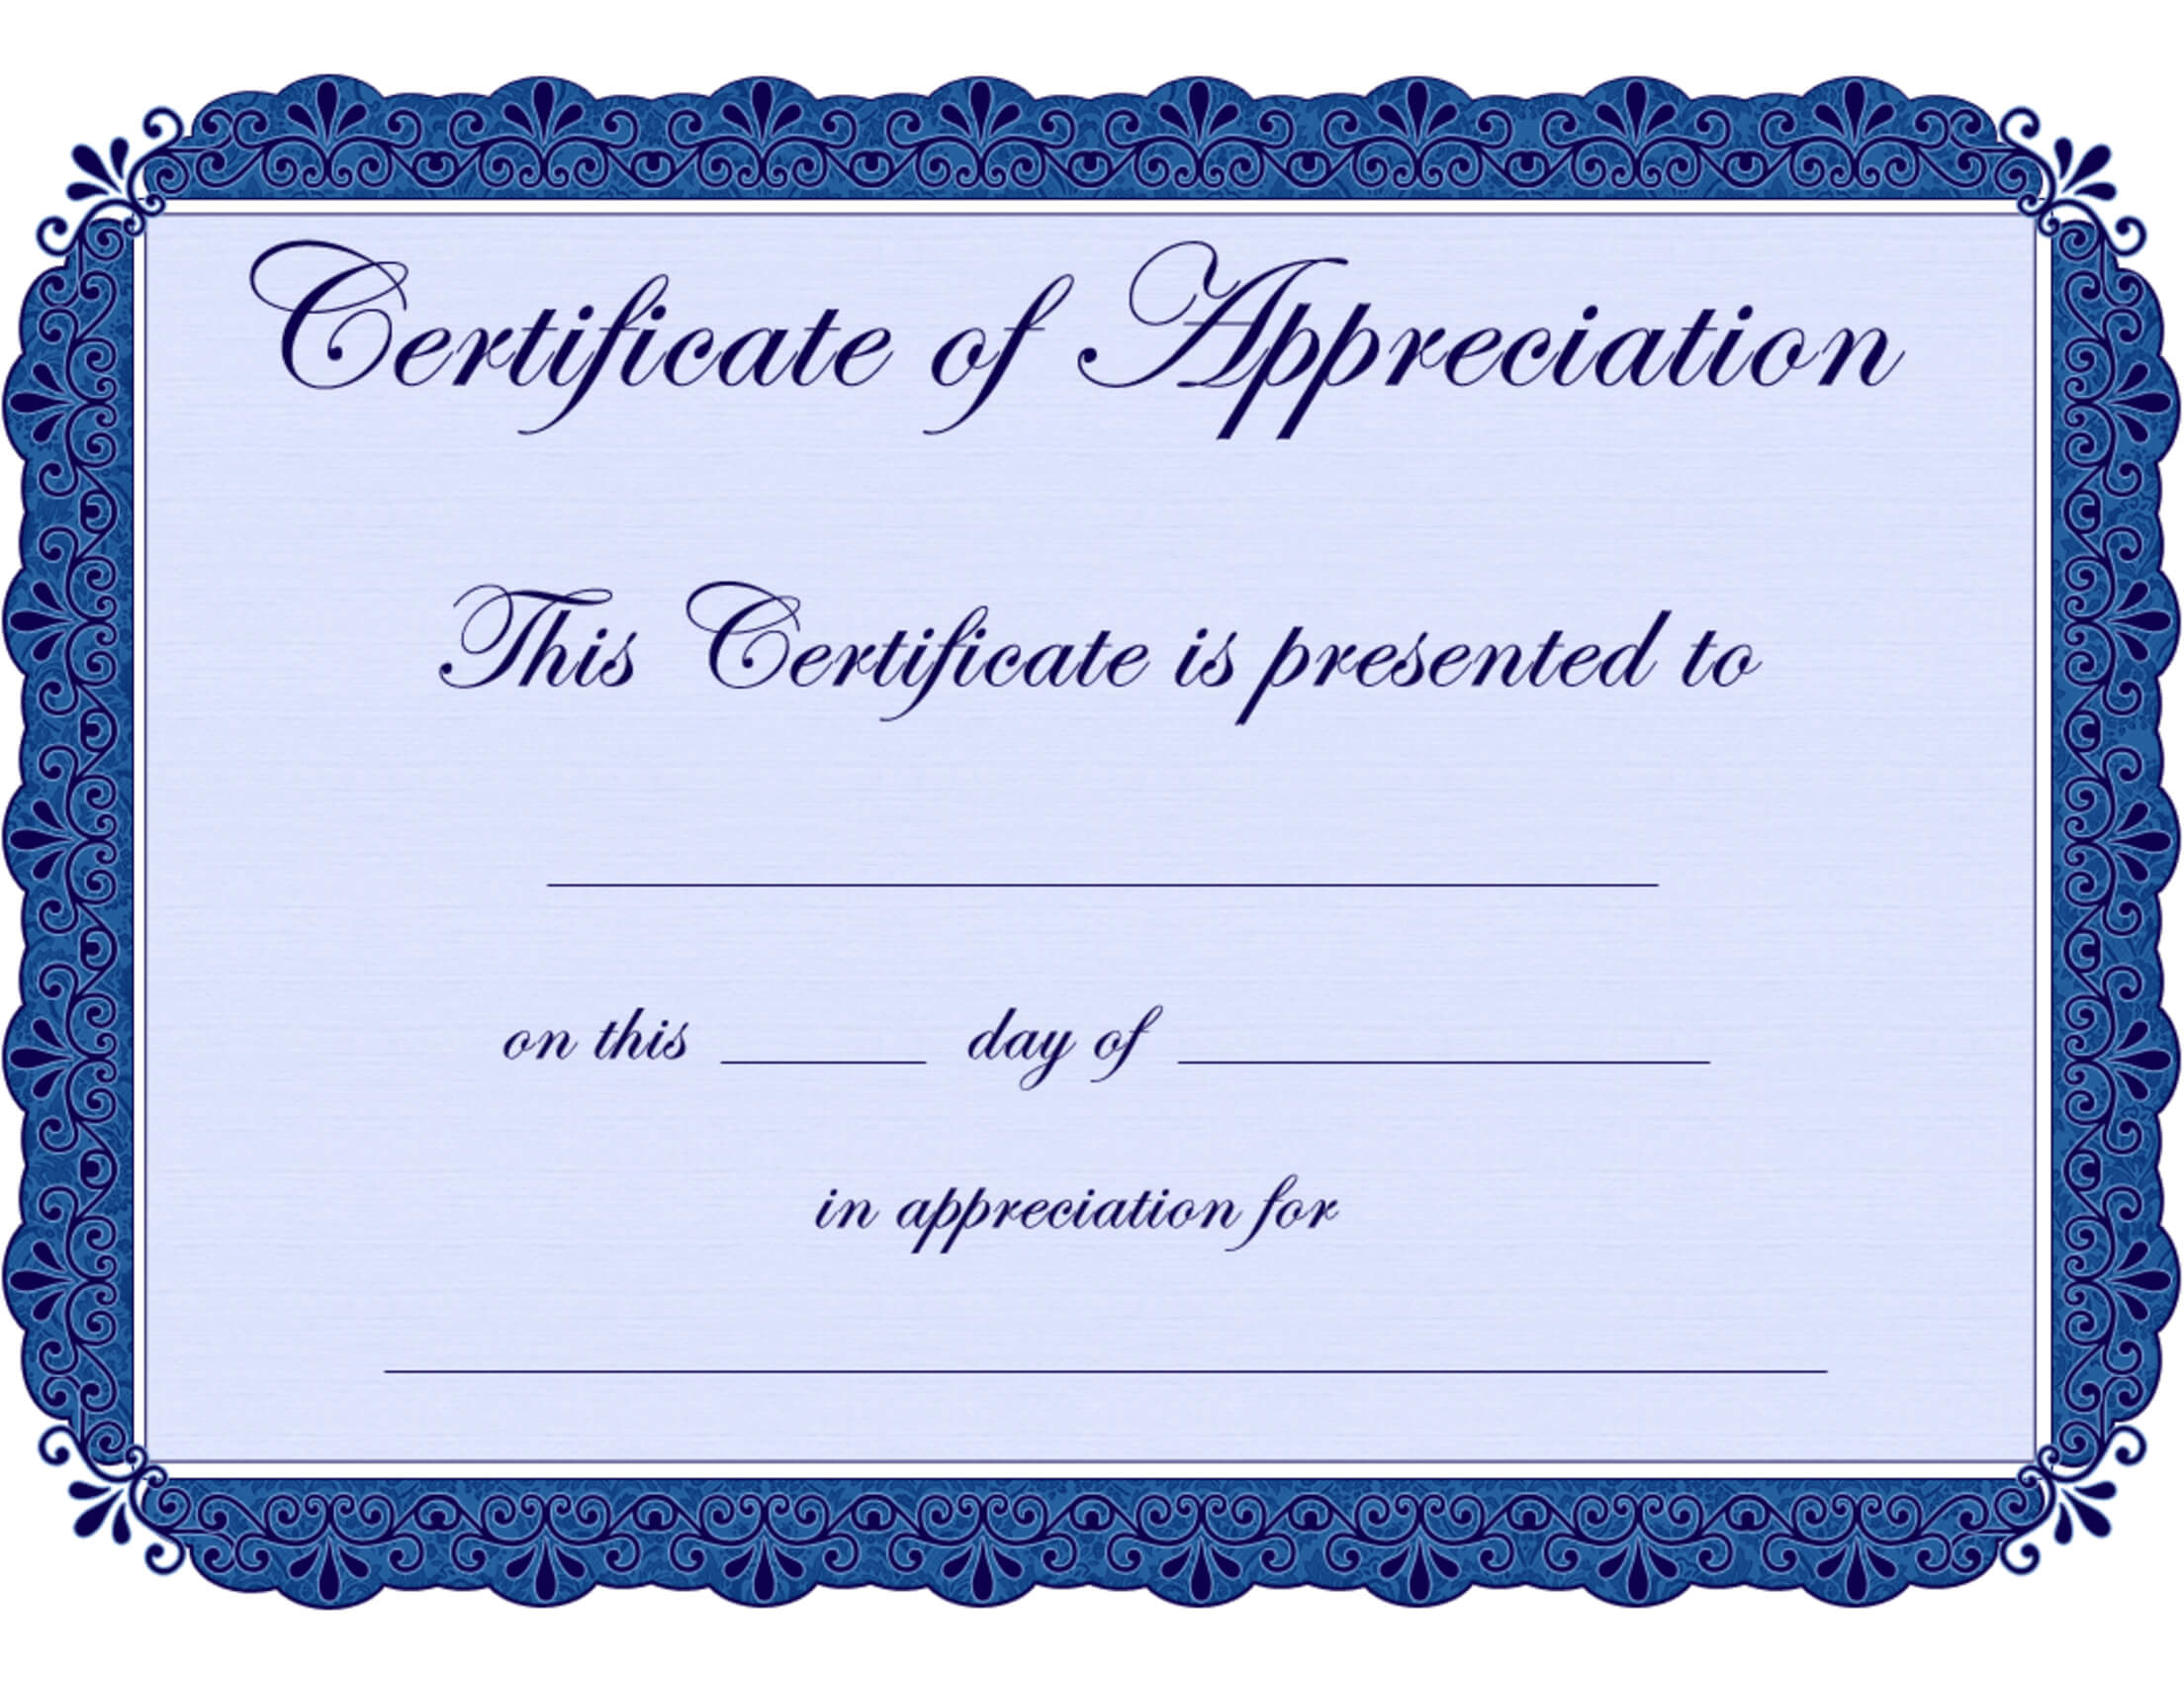 Free Printable Certificates Certificate Of Appreciation Throughout Player Of The Day Certificate Template